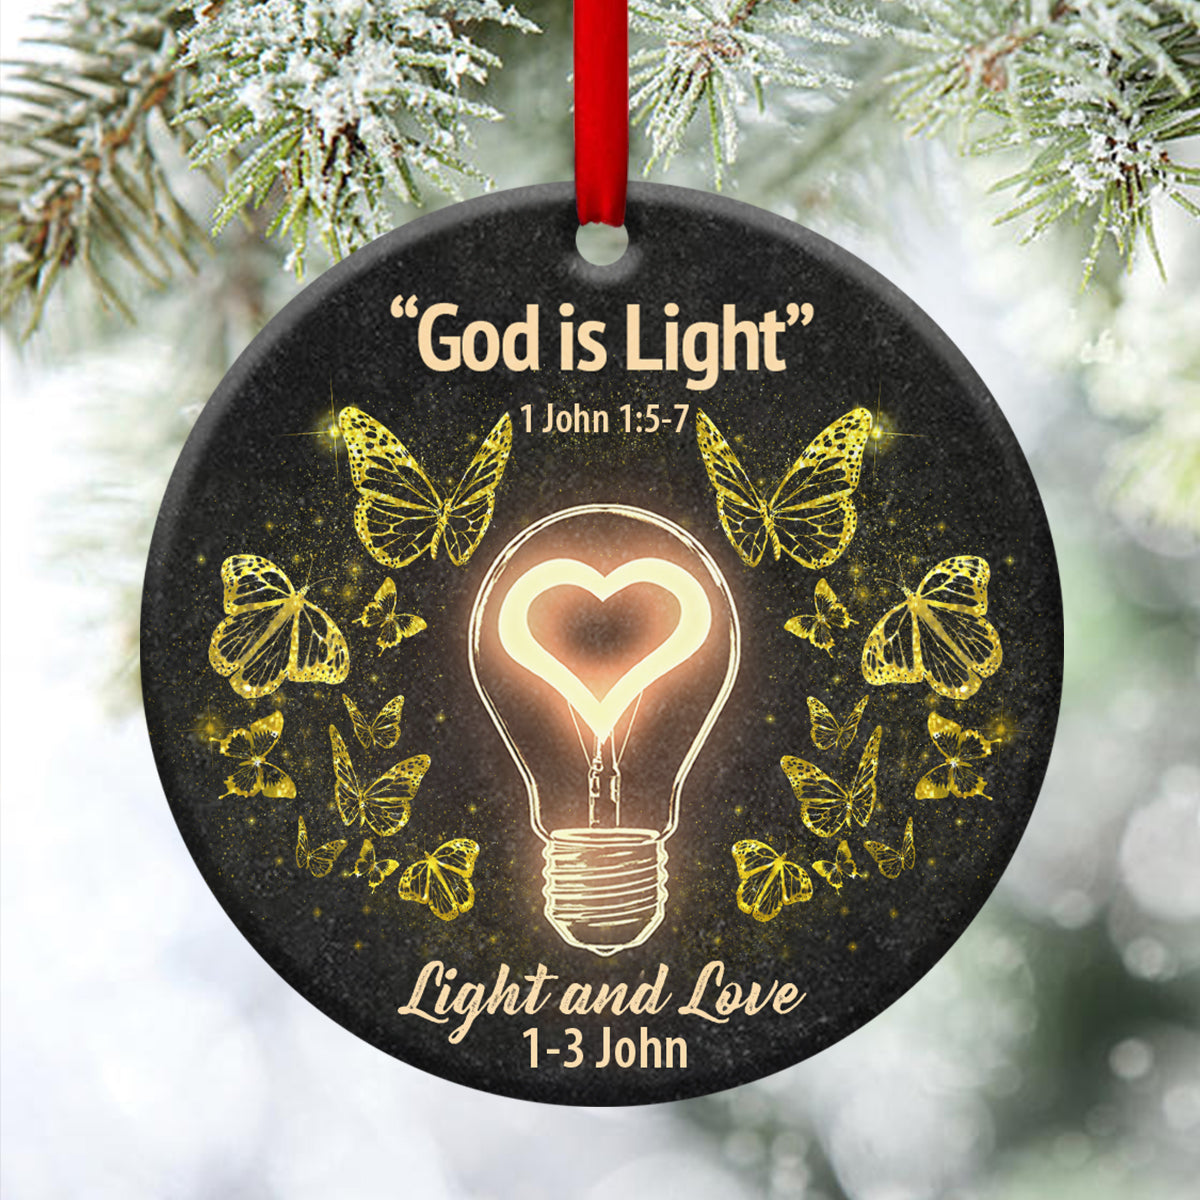 The Light Of God, Unique Christian Ceramic Circle Ornament Gift For Men And Women